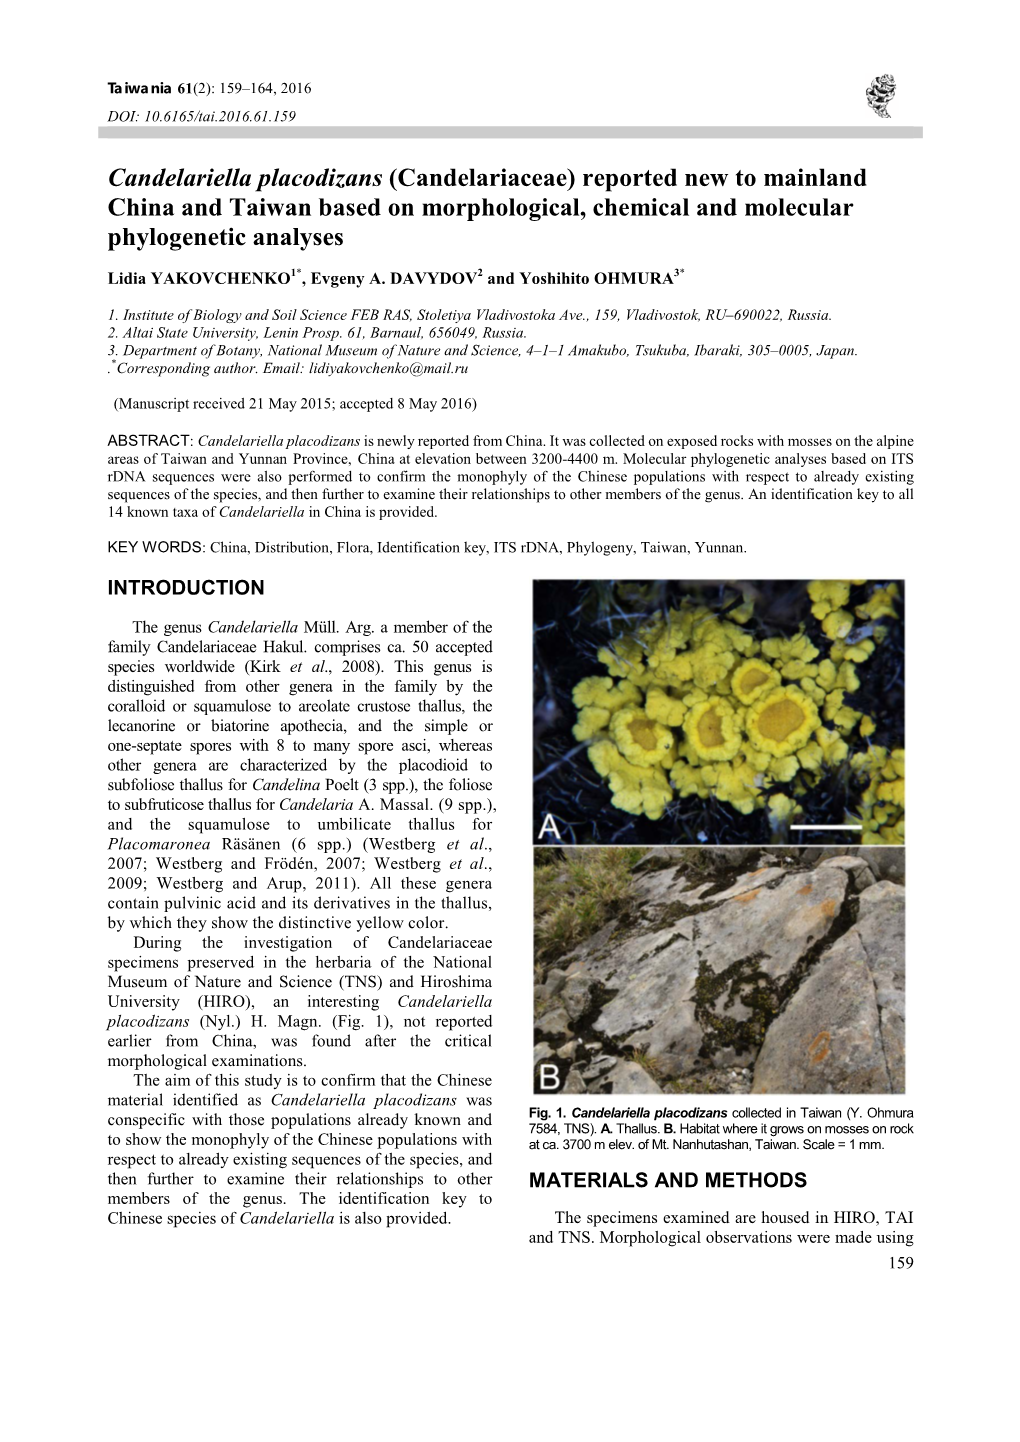 Candelariella Placodizans (Candelariaceae) Reported New to Mainland China and Taiwan Based on Morphological, Chemical and Molecular Phylogenetic Analyses